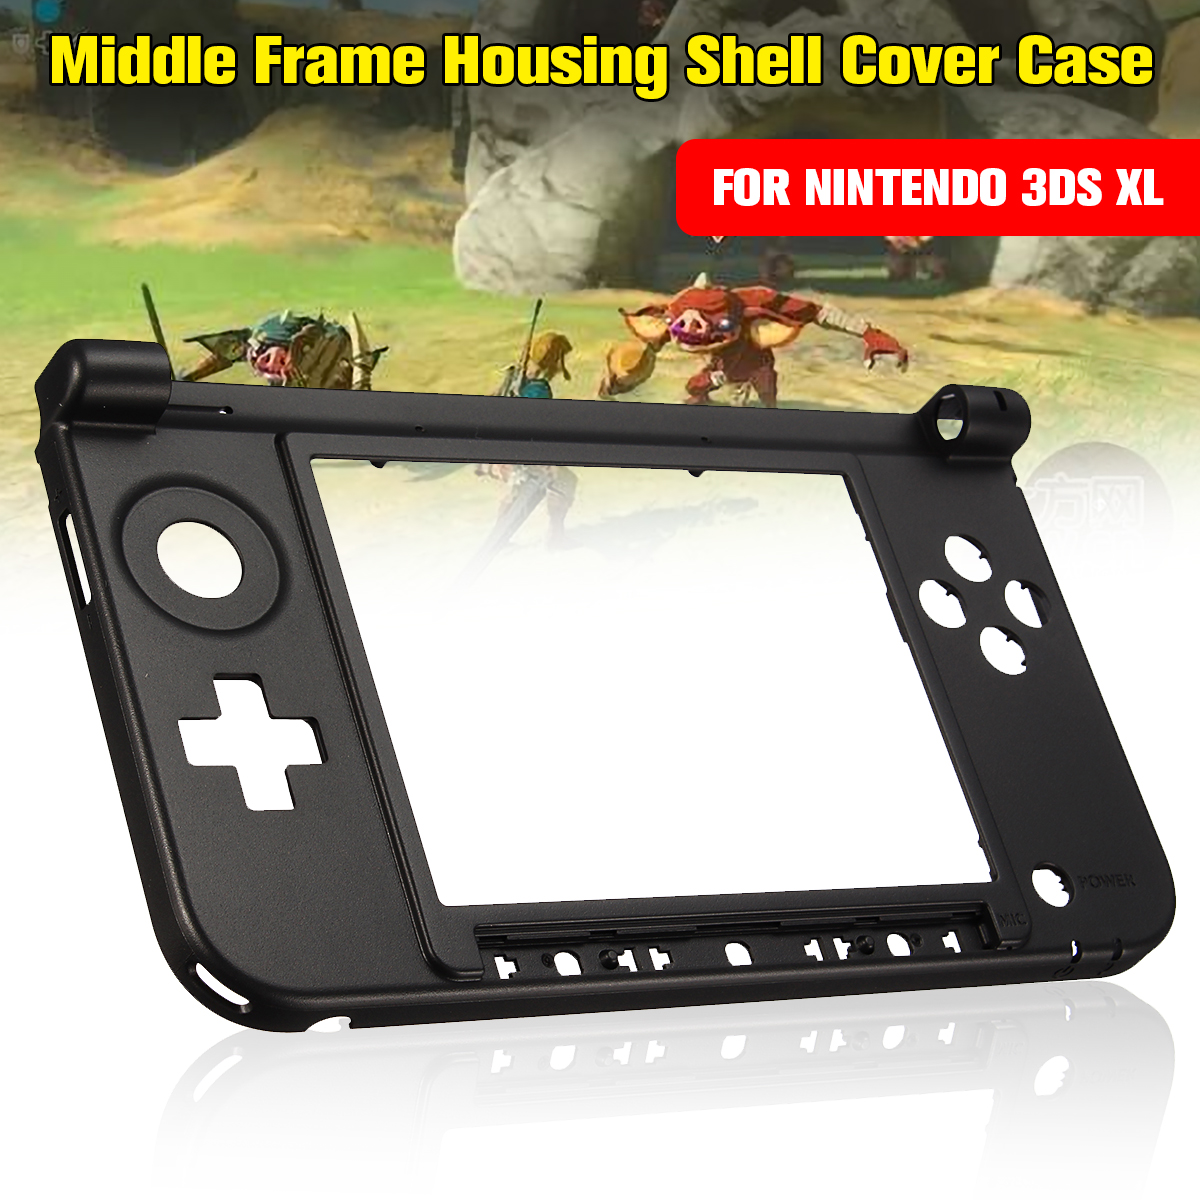 Replacement Bottom Middle Frame Housing Shell Cover Case for Nintendo 3DS XL 3DS LL Game Console 50